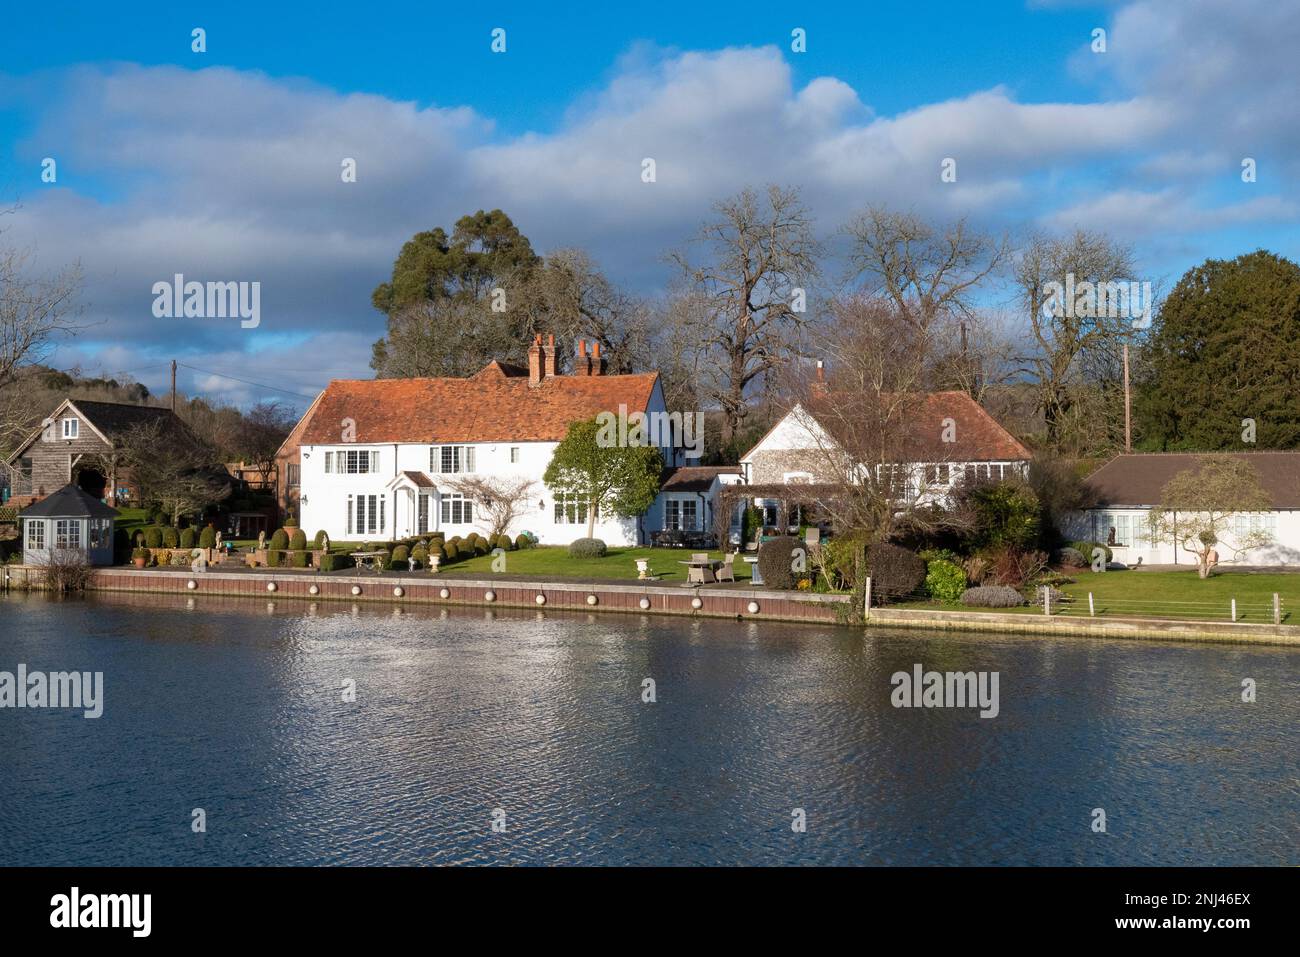 Riverside houses overlooking Hambledon weir and  lock ,upper thames on a sunny day with the Thames in flood after rain storms. nr henley-on-thames Stock Photo